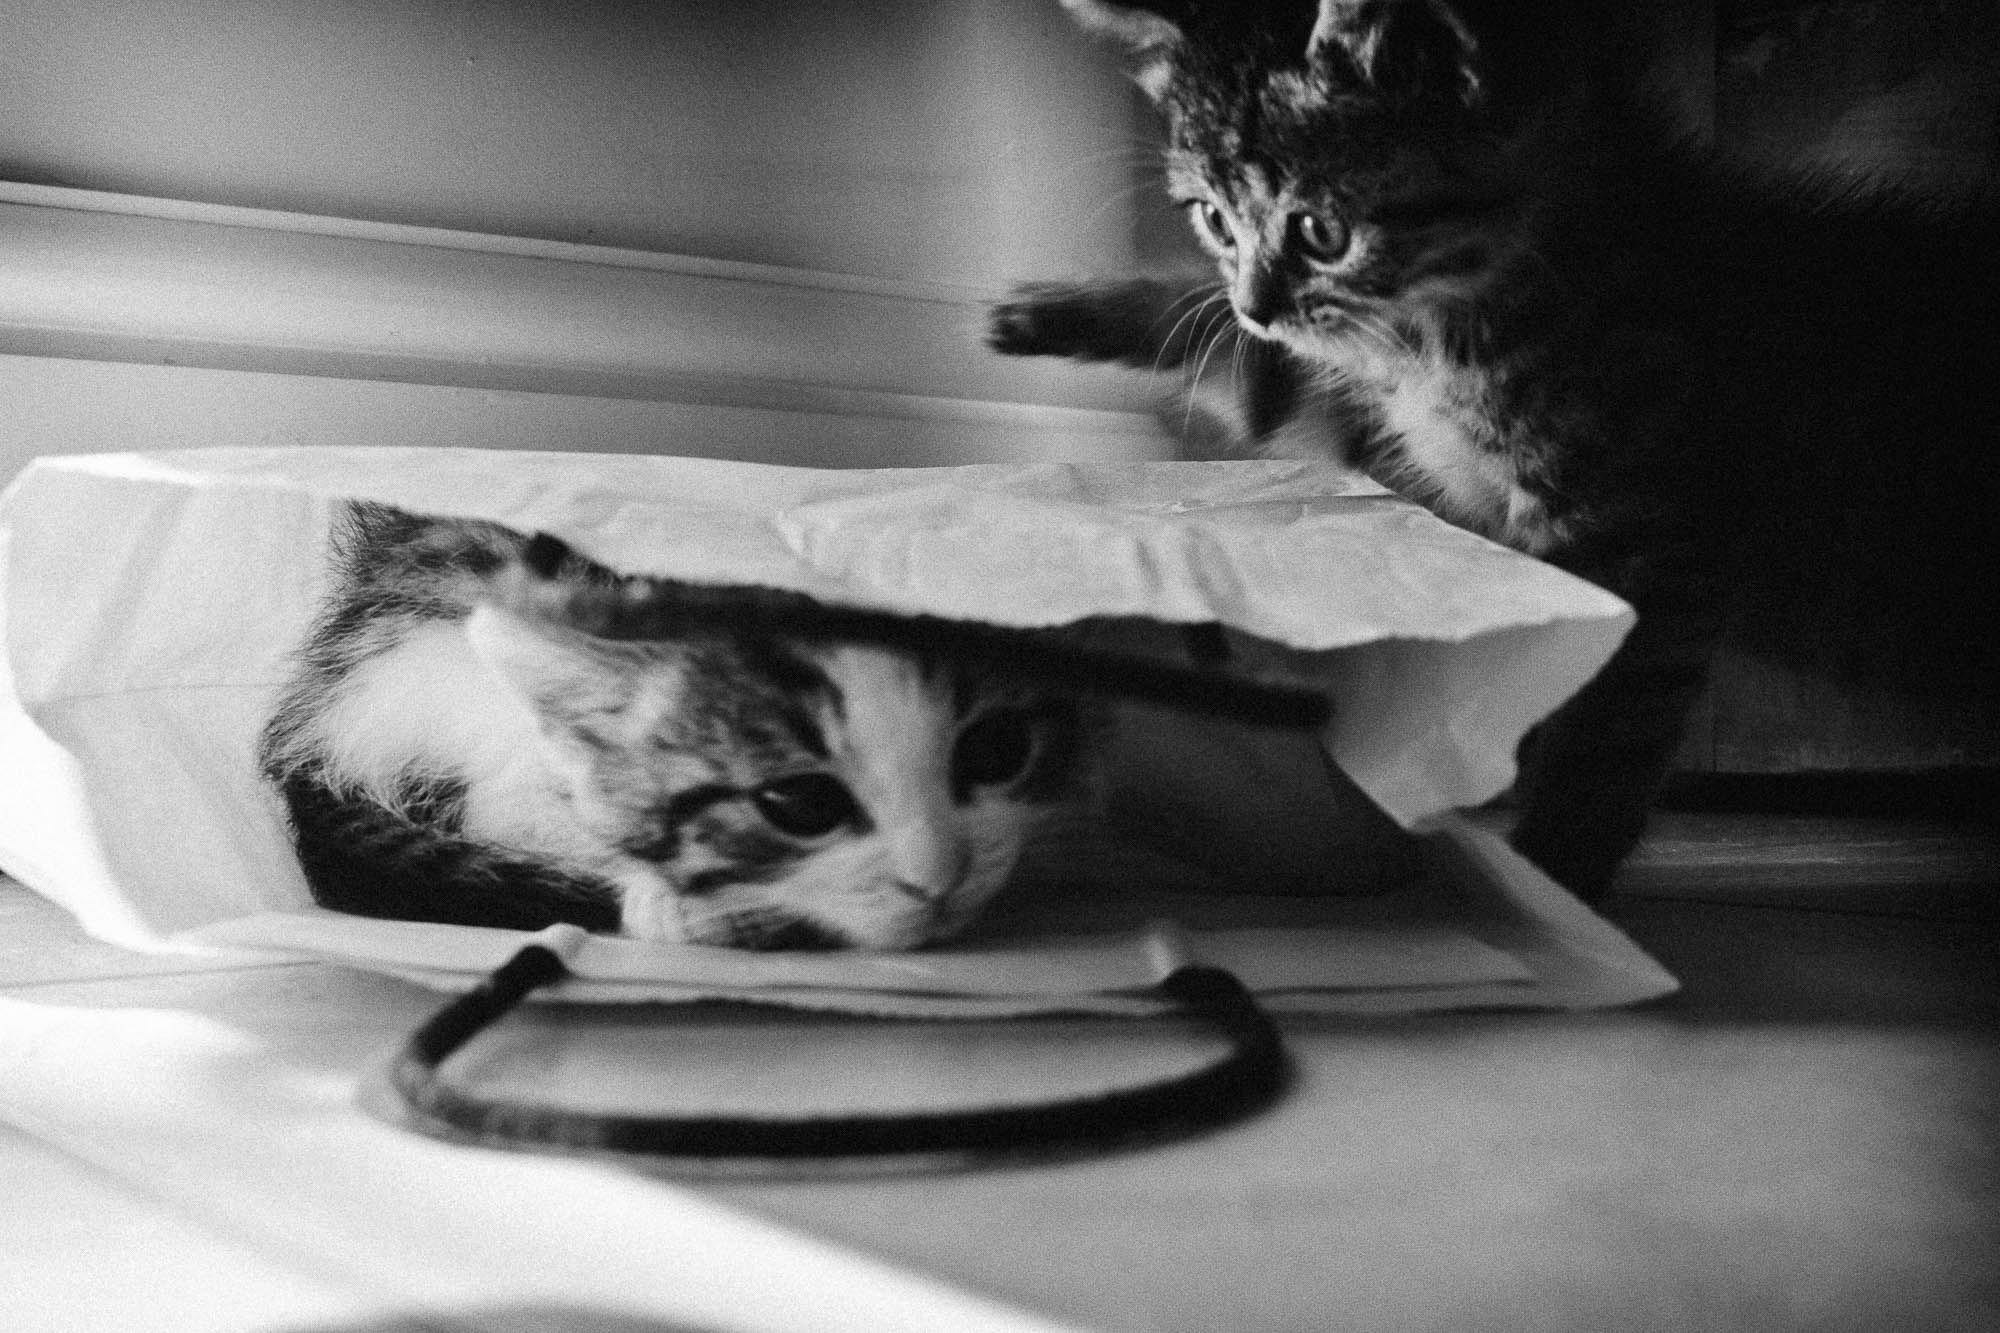 rufus and martha playing in a paper bag